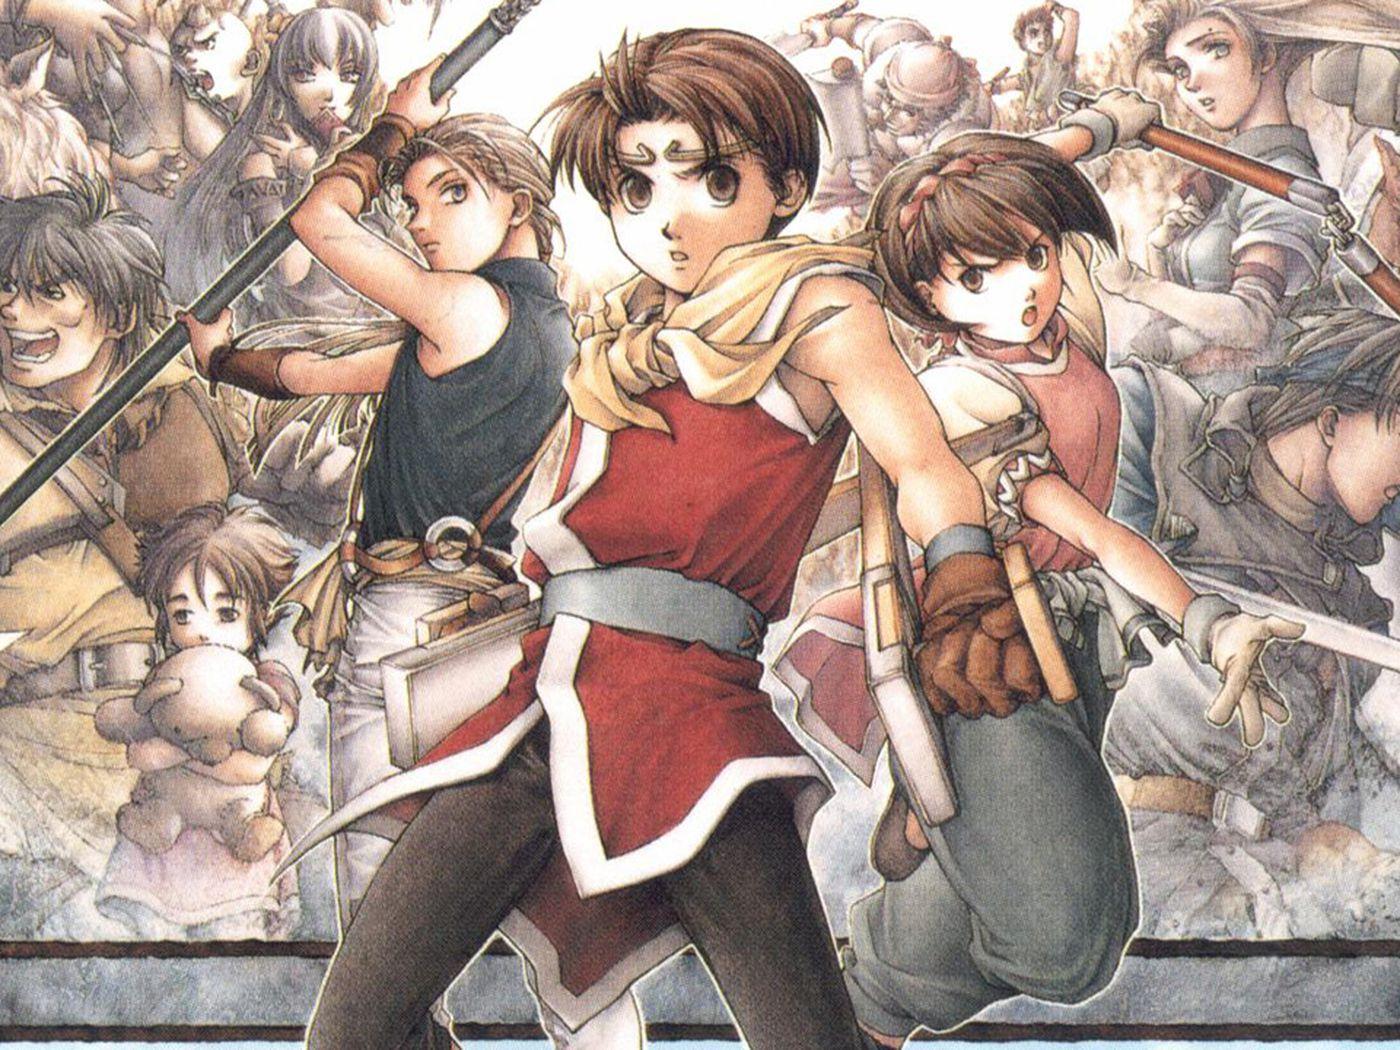 Suikoden 2 arrives on PSN tomorrow for $9.99 (update)